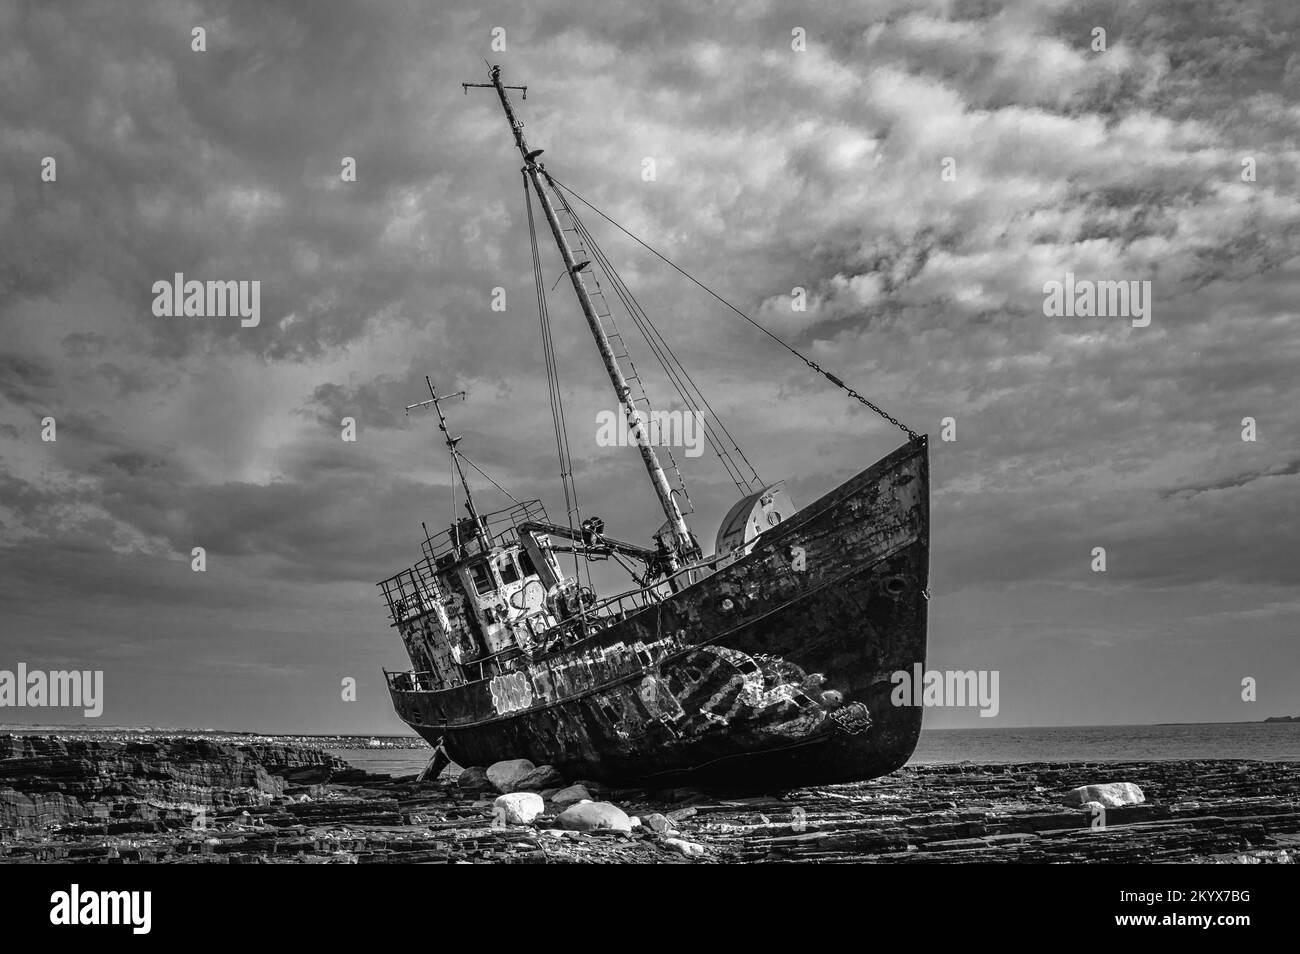 Moody image of a sunken rusty ship thrown on the shore. Rybachy Peninsula, Russia. Black and white. Stock Photo